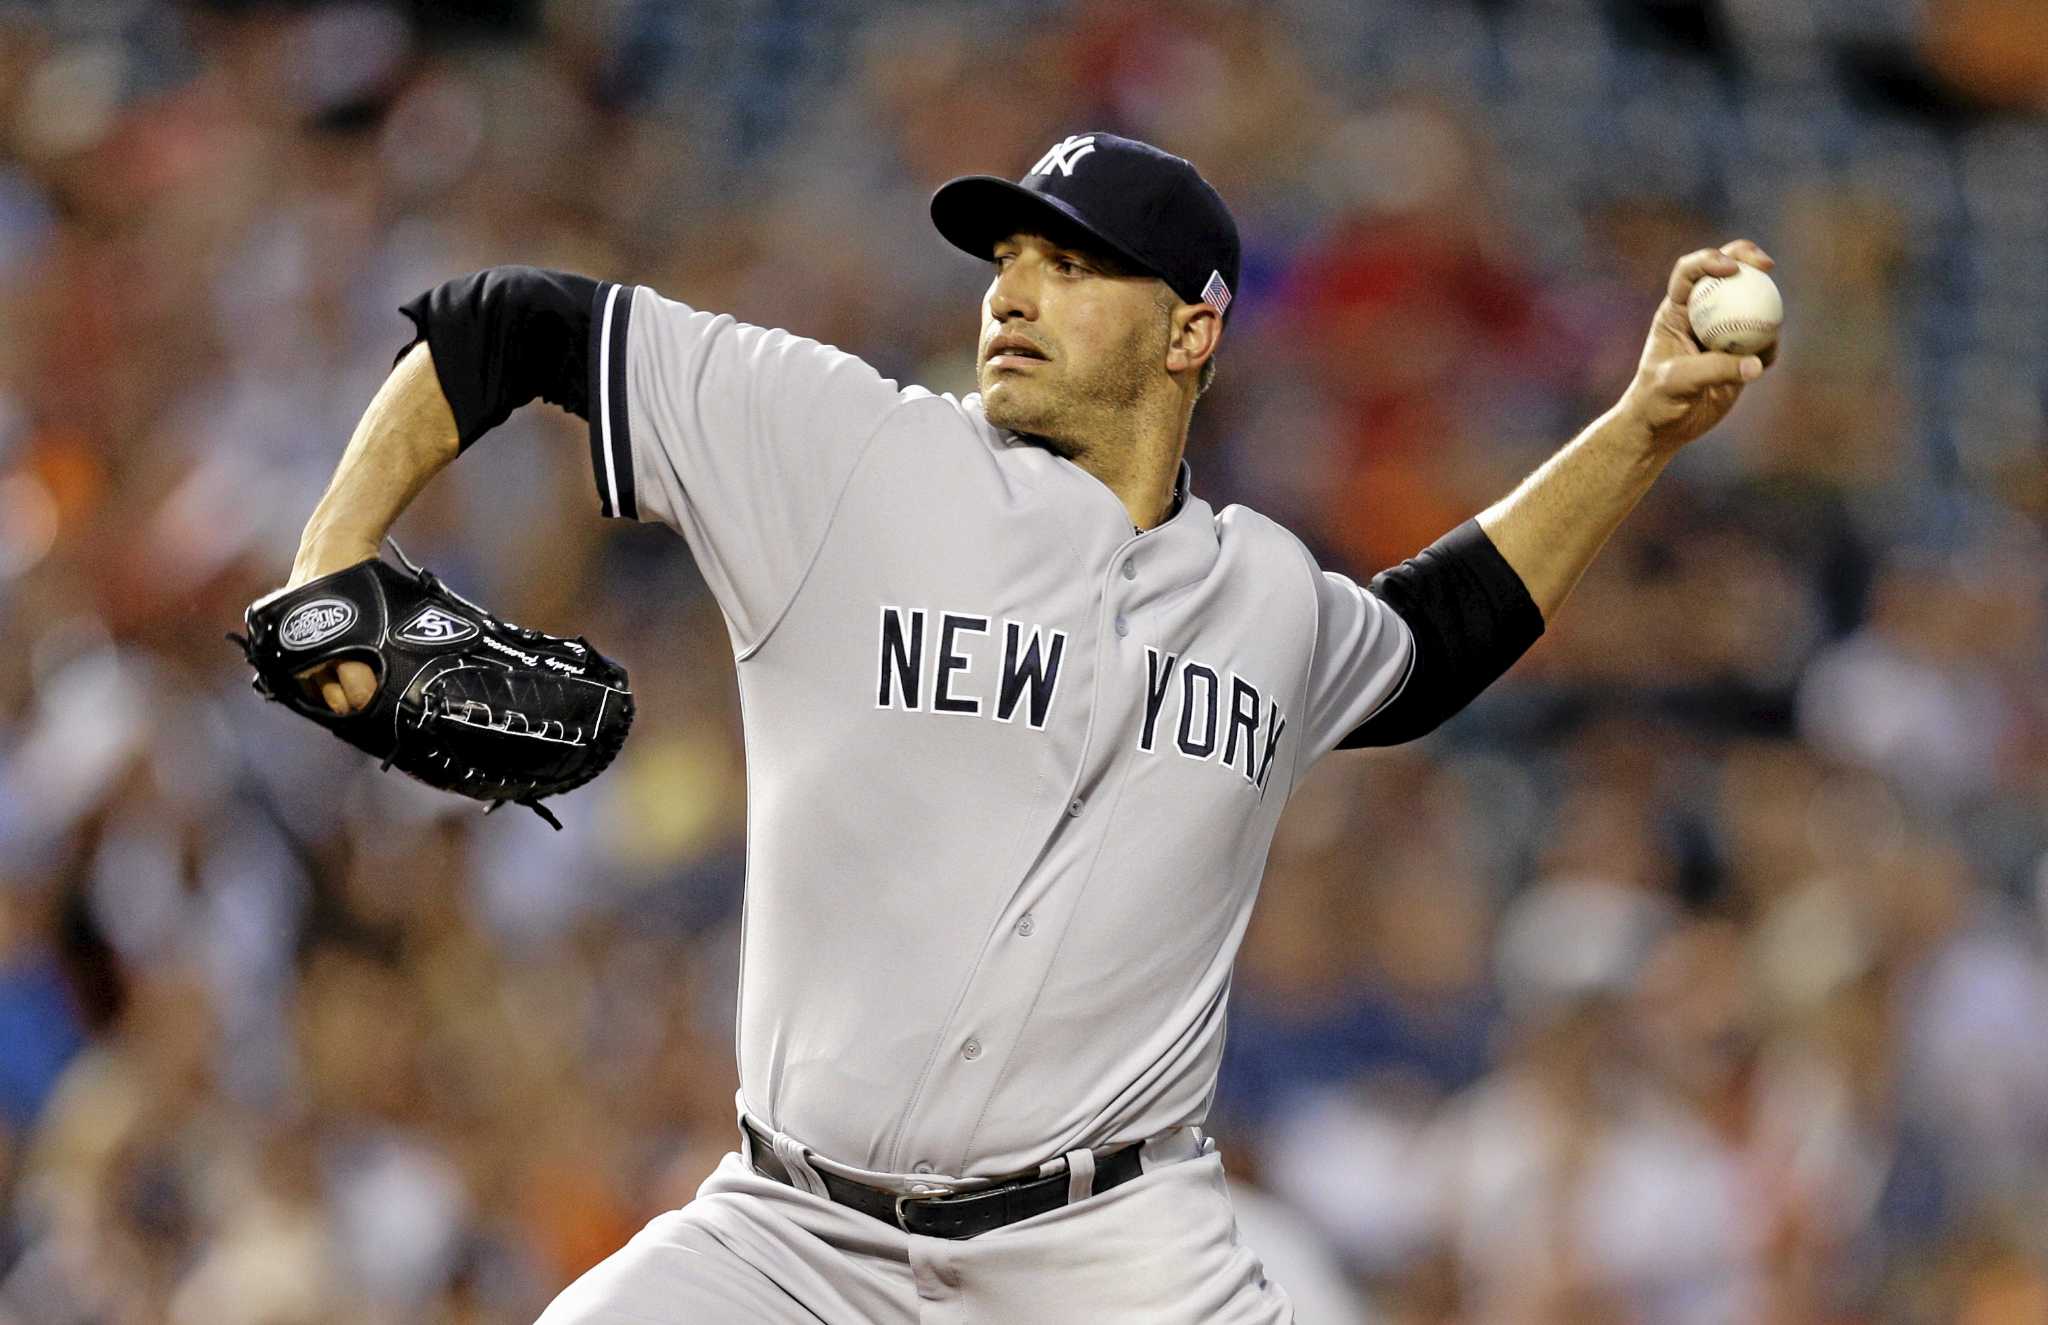 Yankees pitcher Andy Pettitte goes out a winner in his hometown